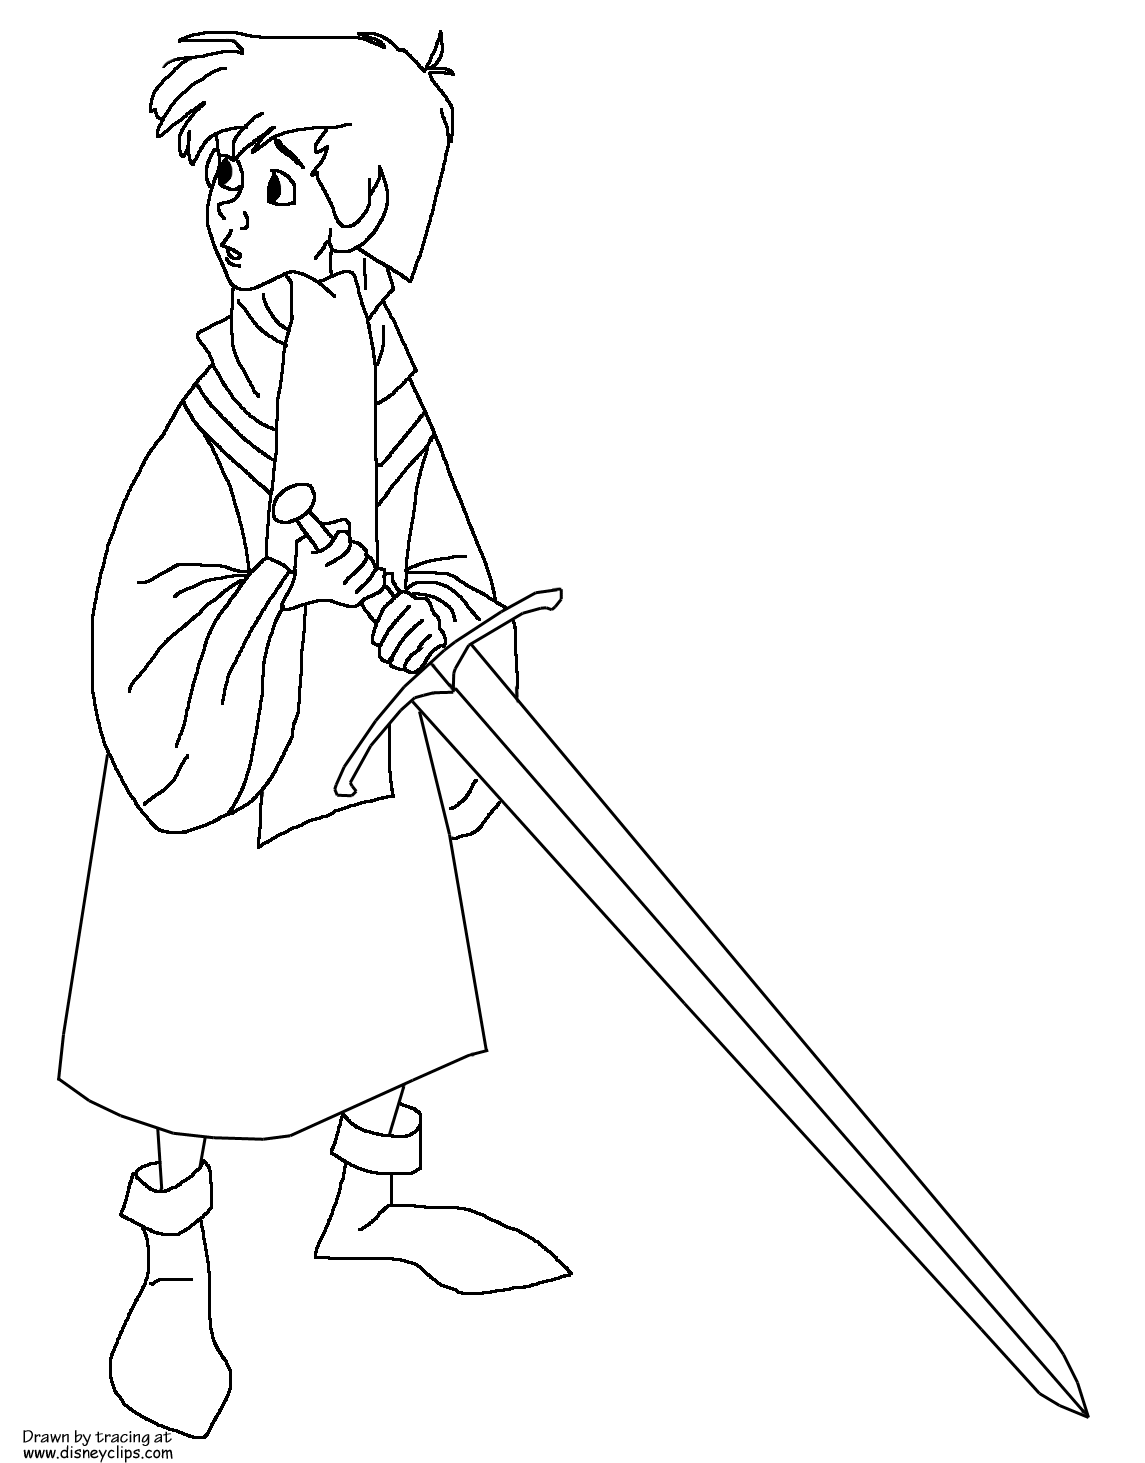 zelda sword in the stone coloring pages - photo #2